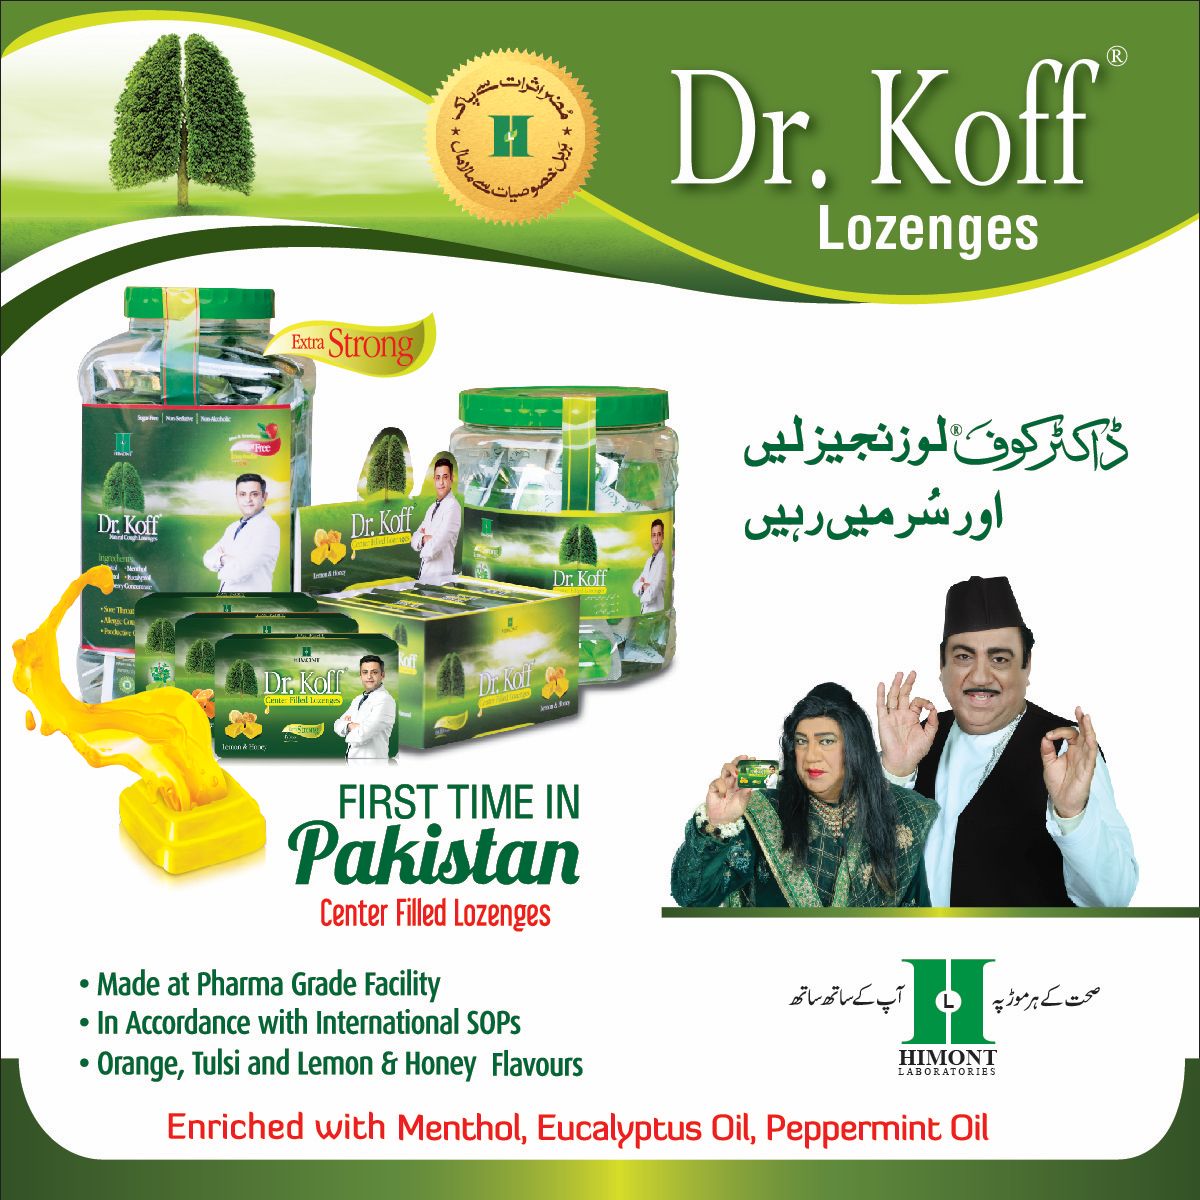 Dr. Koff - centered filled Lozenges by Himont !!

🛒 Buy Now:
himont.com/shop/product/d…
himont.com/shop/product/d…
himont.com/shop/product/d…
himont.com/shop/product/d…

#cough #flu #smog #herbal #herbalmedicine #himont #laboratories #health #sorethroat